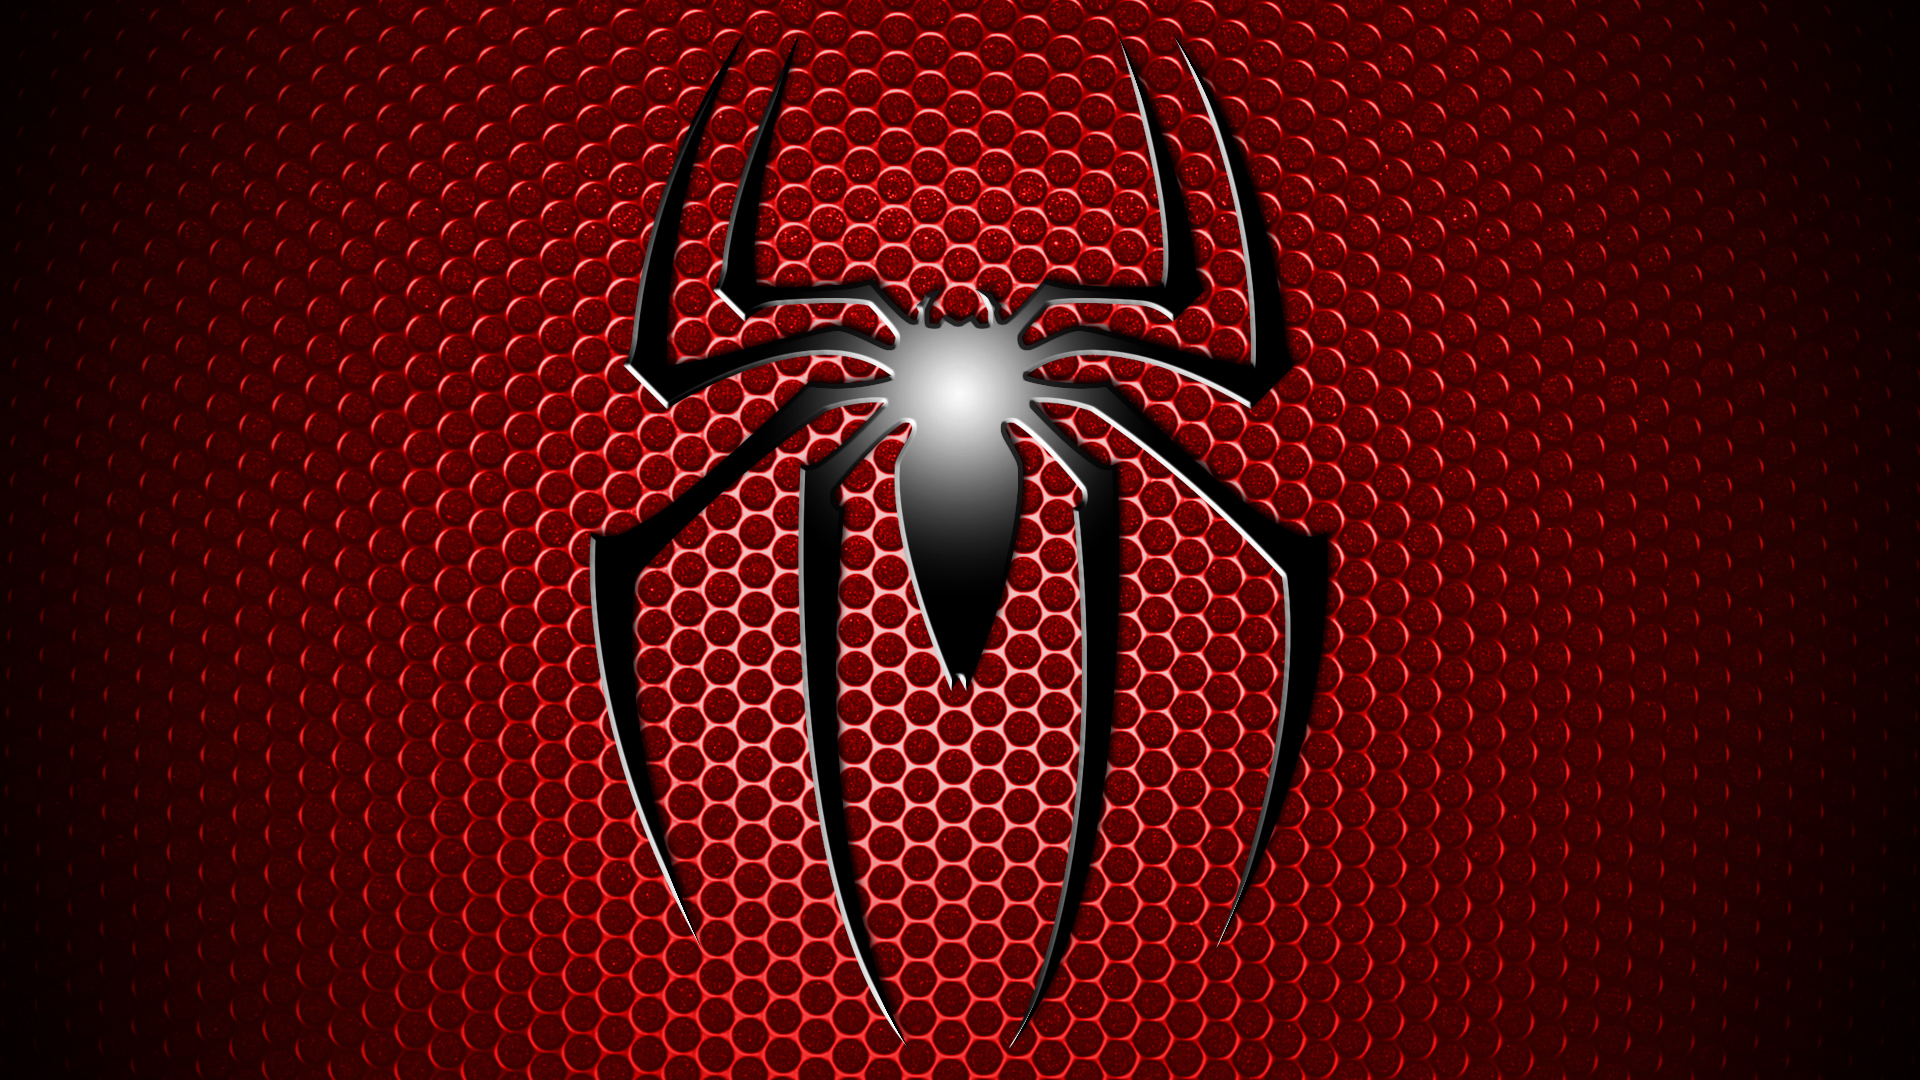 Spiderman background pictures